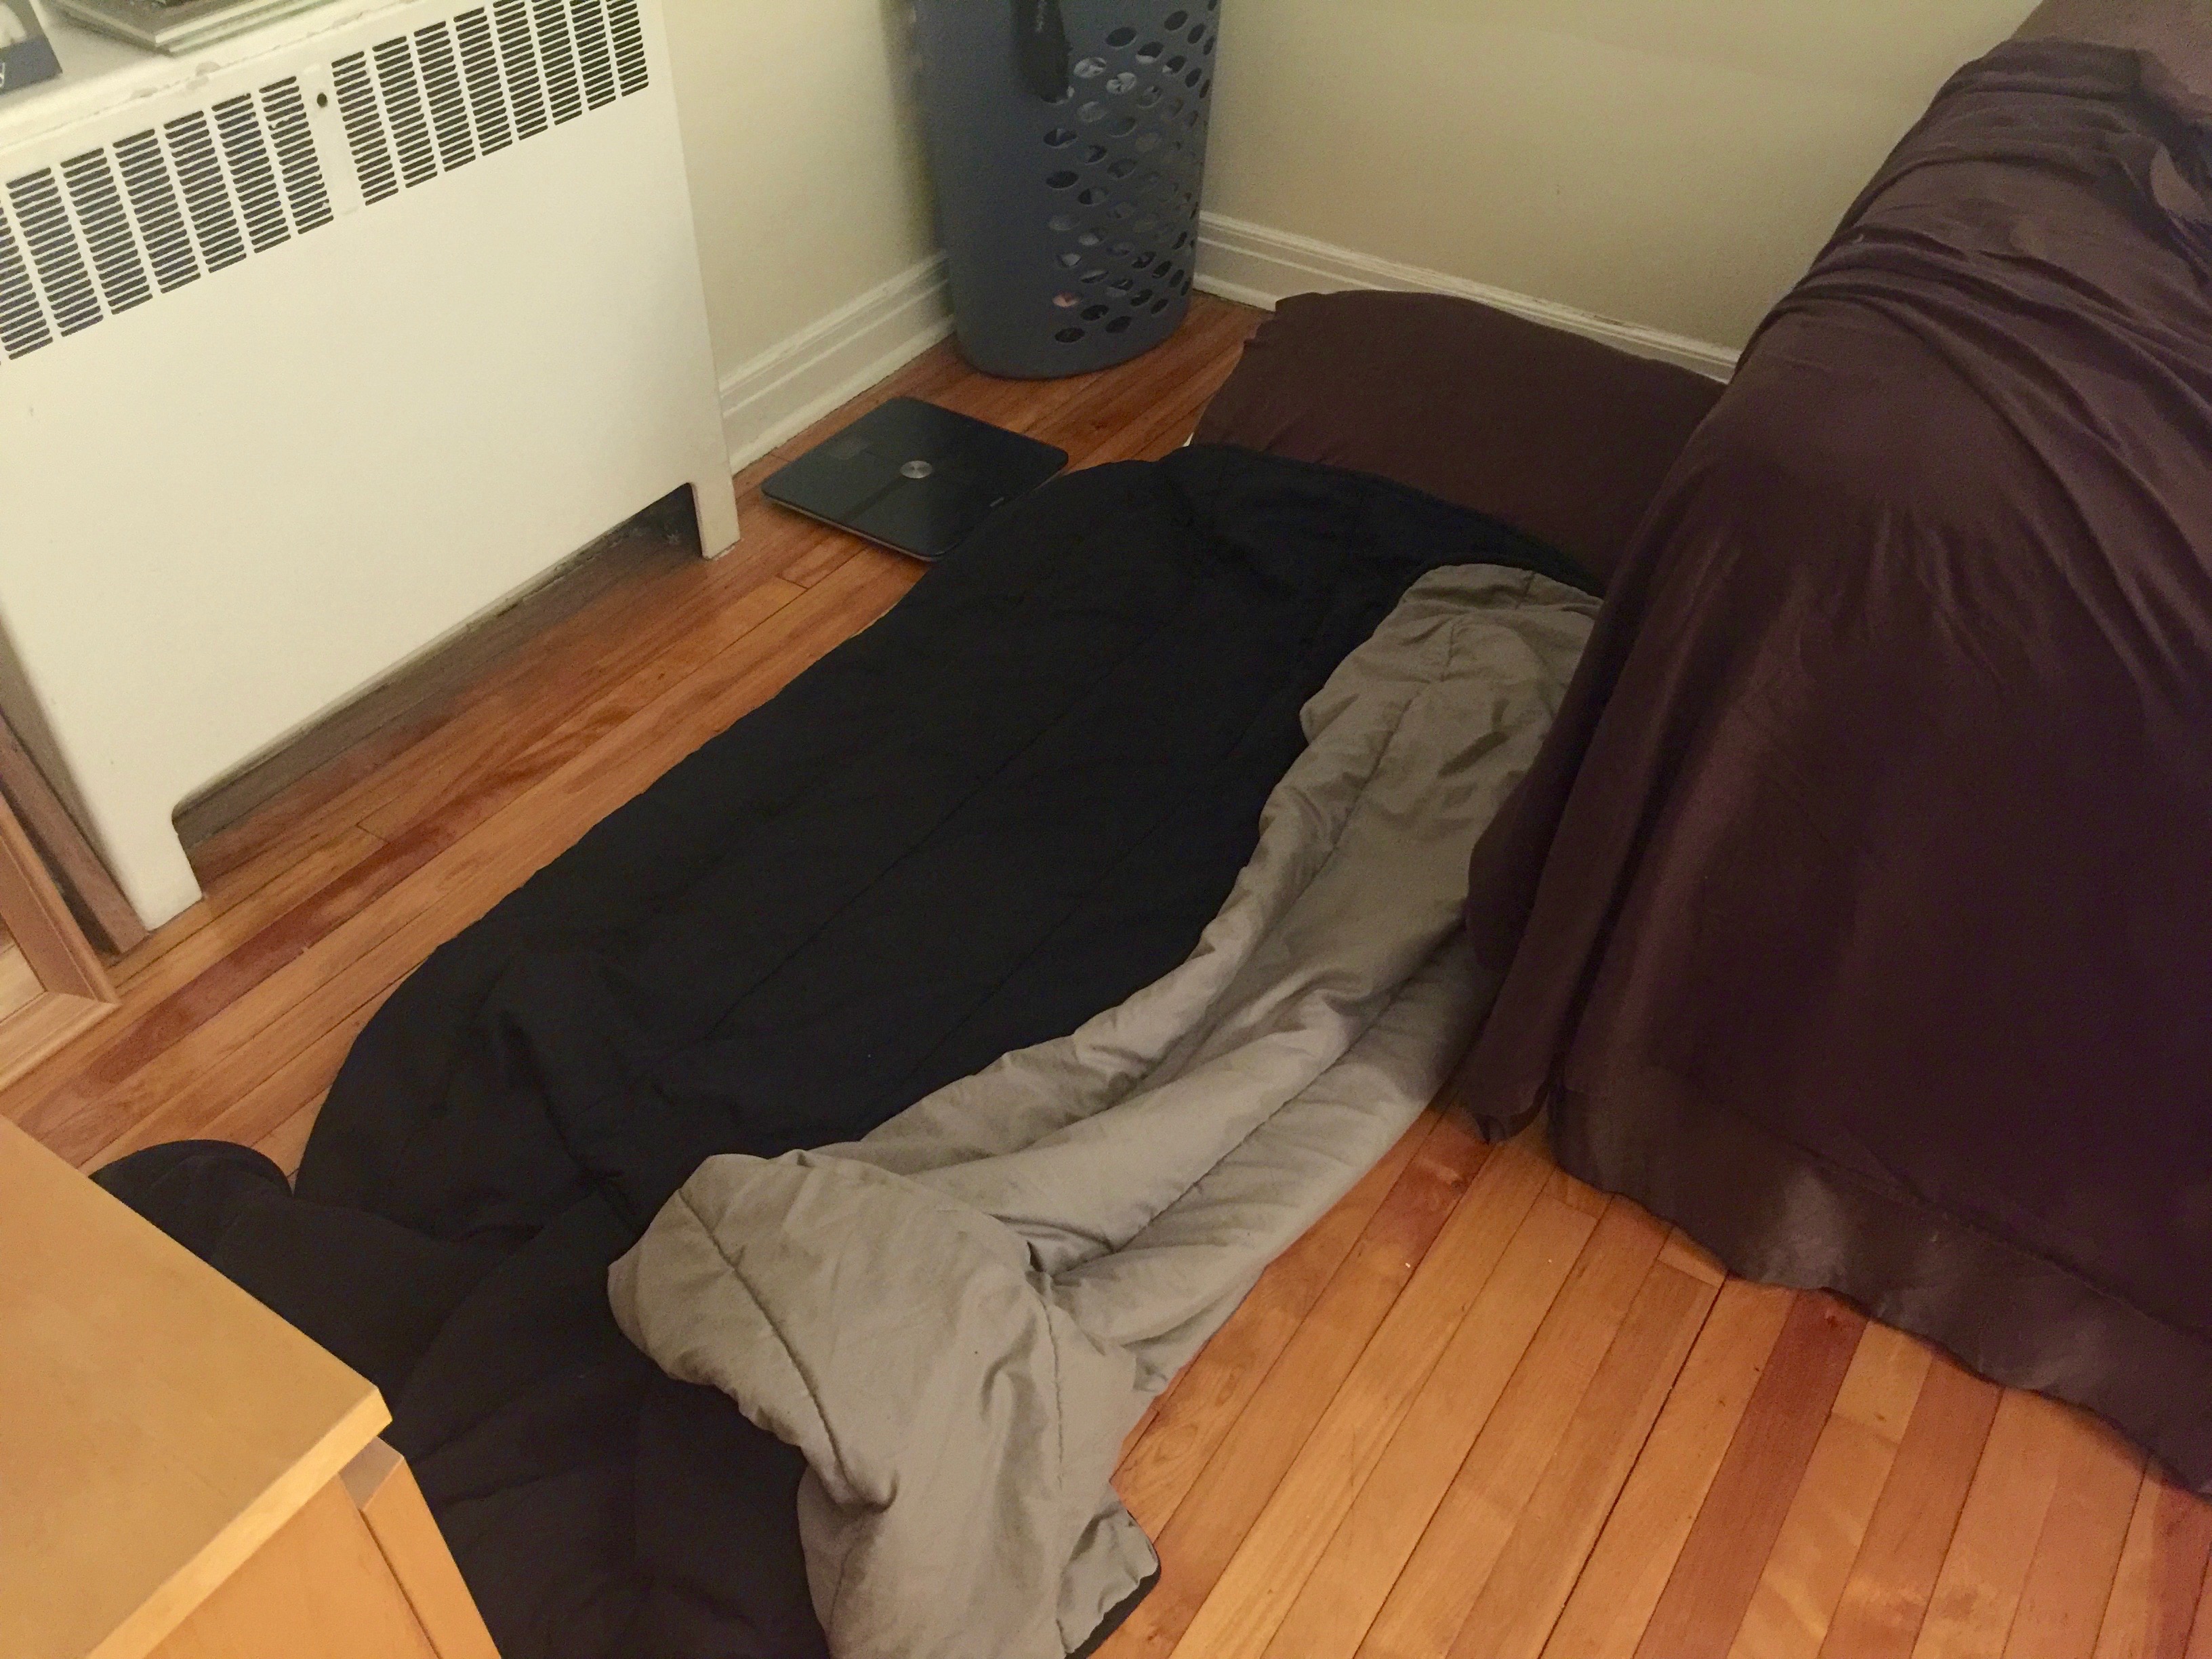 My bed for the month—a yoga mat that I kept on the floor beside my bed.